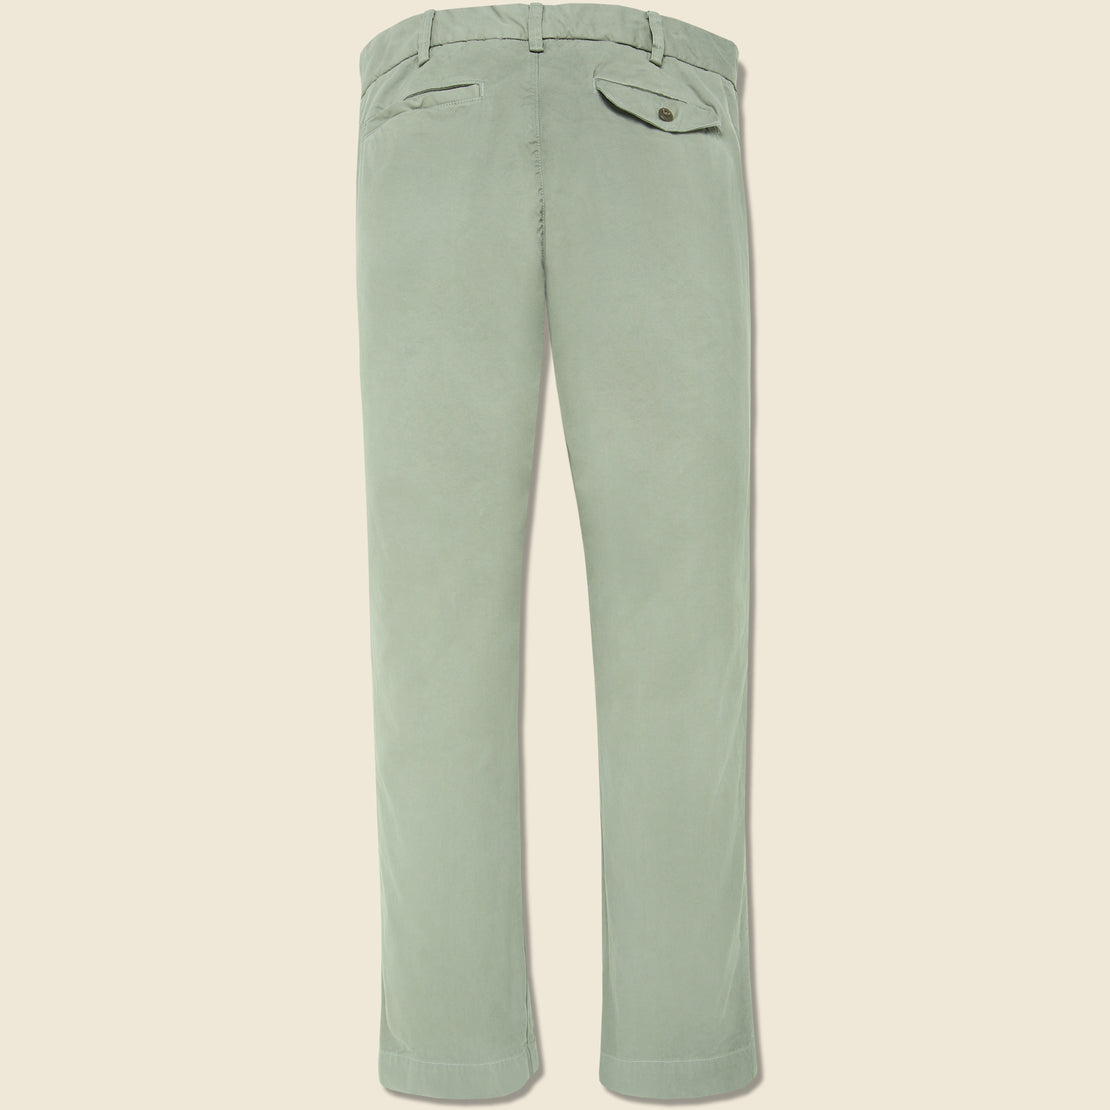 Twill Original Chino - Sprout - Save Khaki - STAG Provisions - Pants - Twill